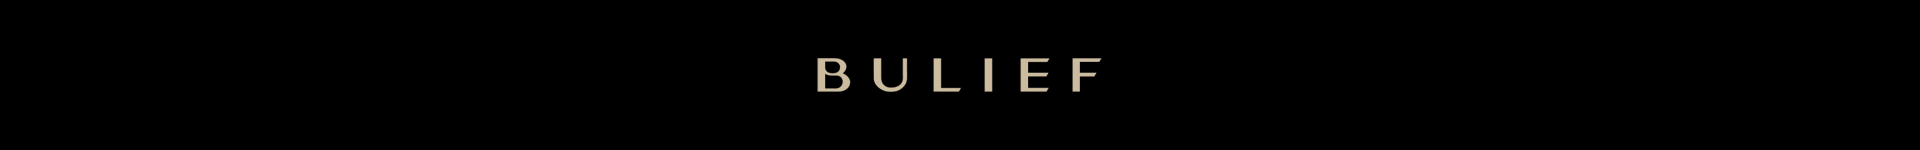 Bulief Watch Co.s background